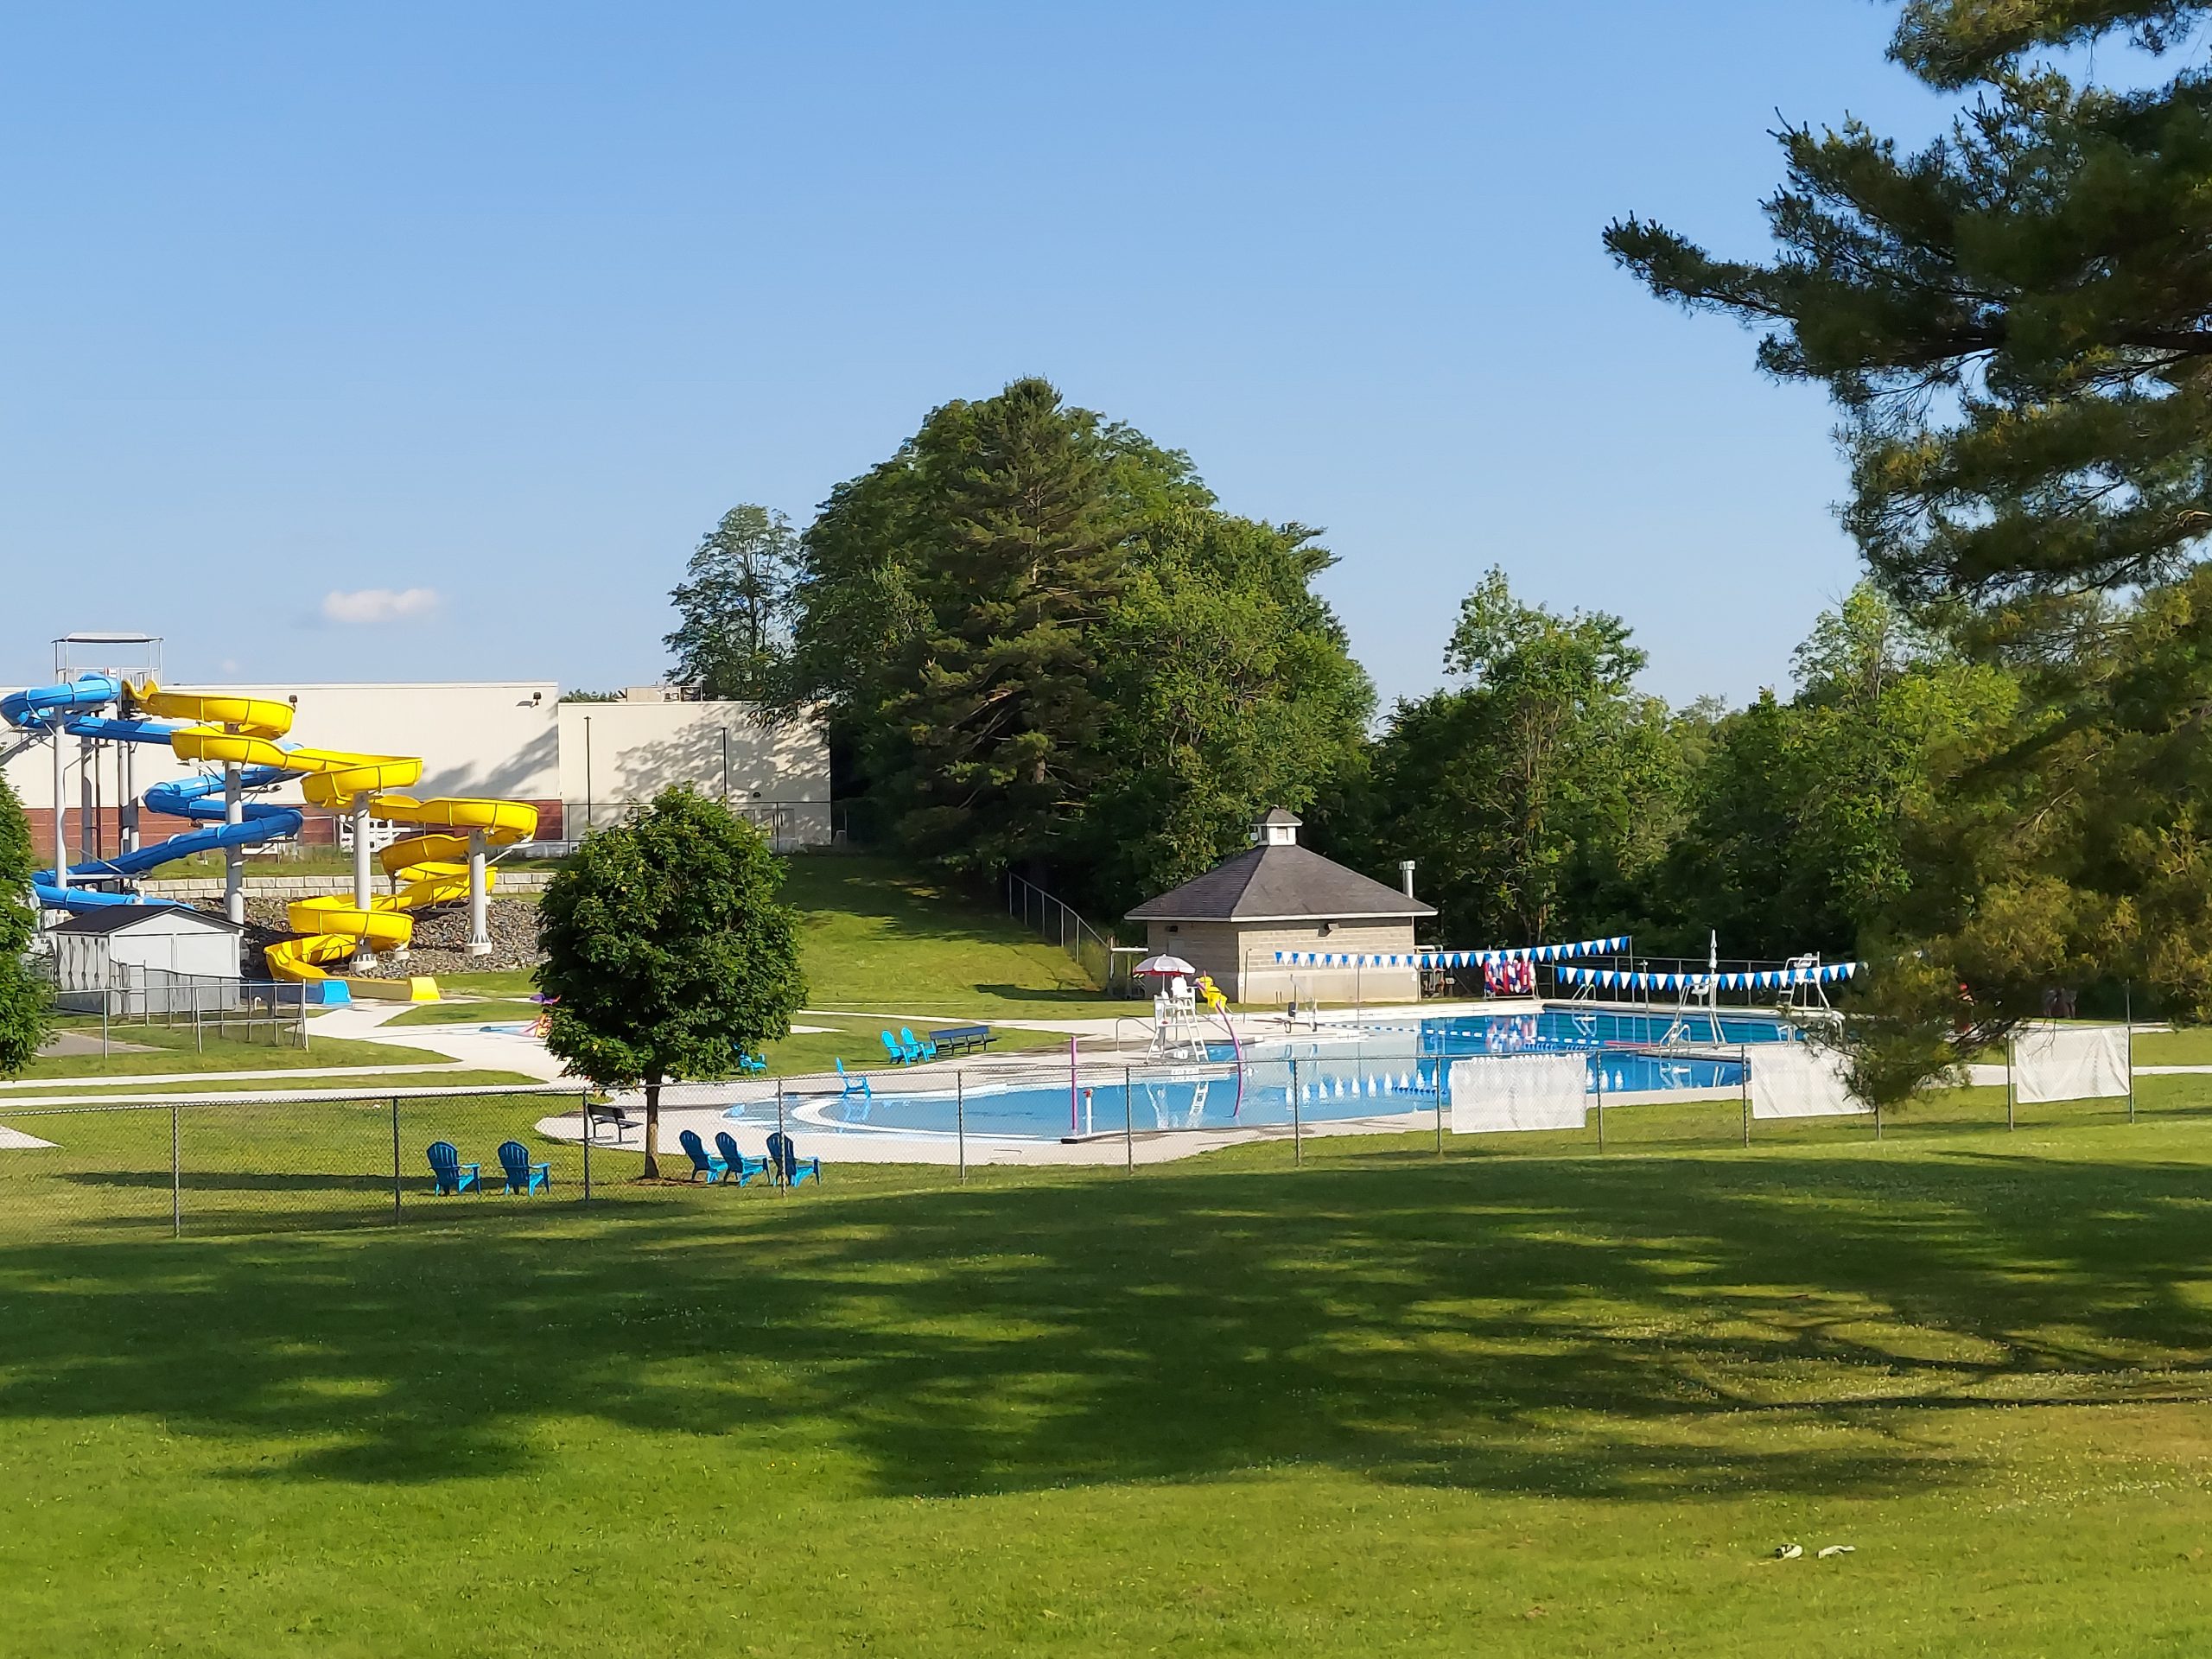 Image of fun slides and outdoor pool.